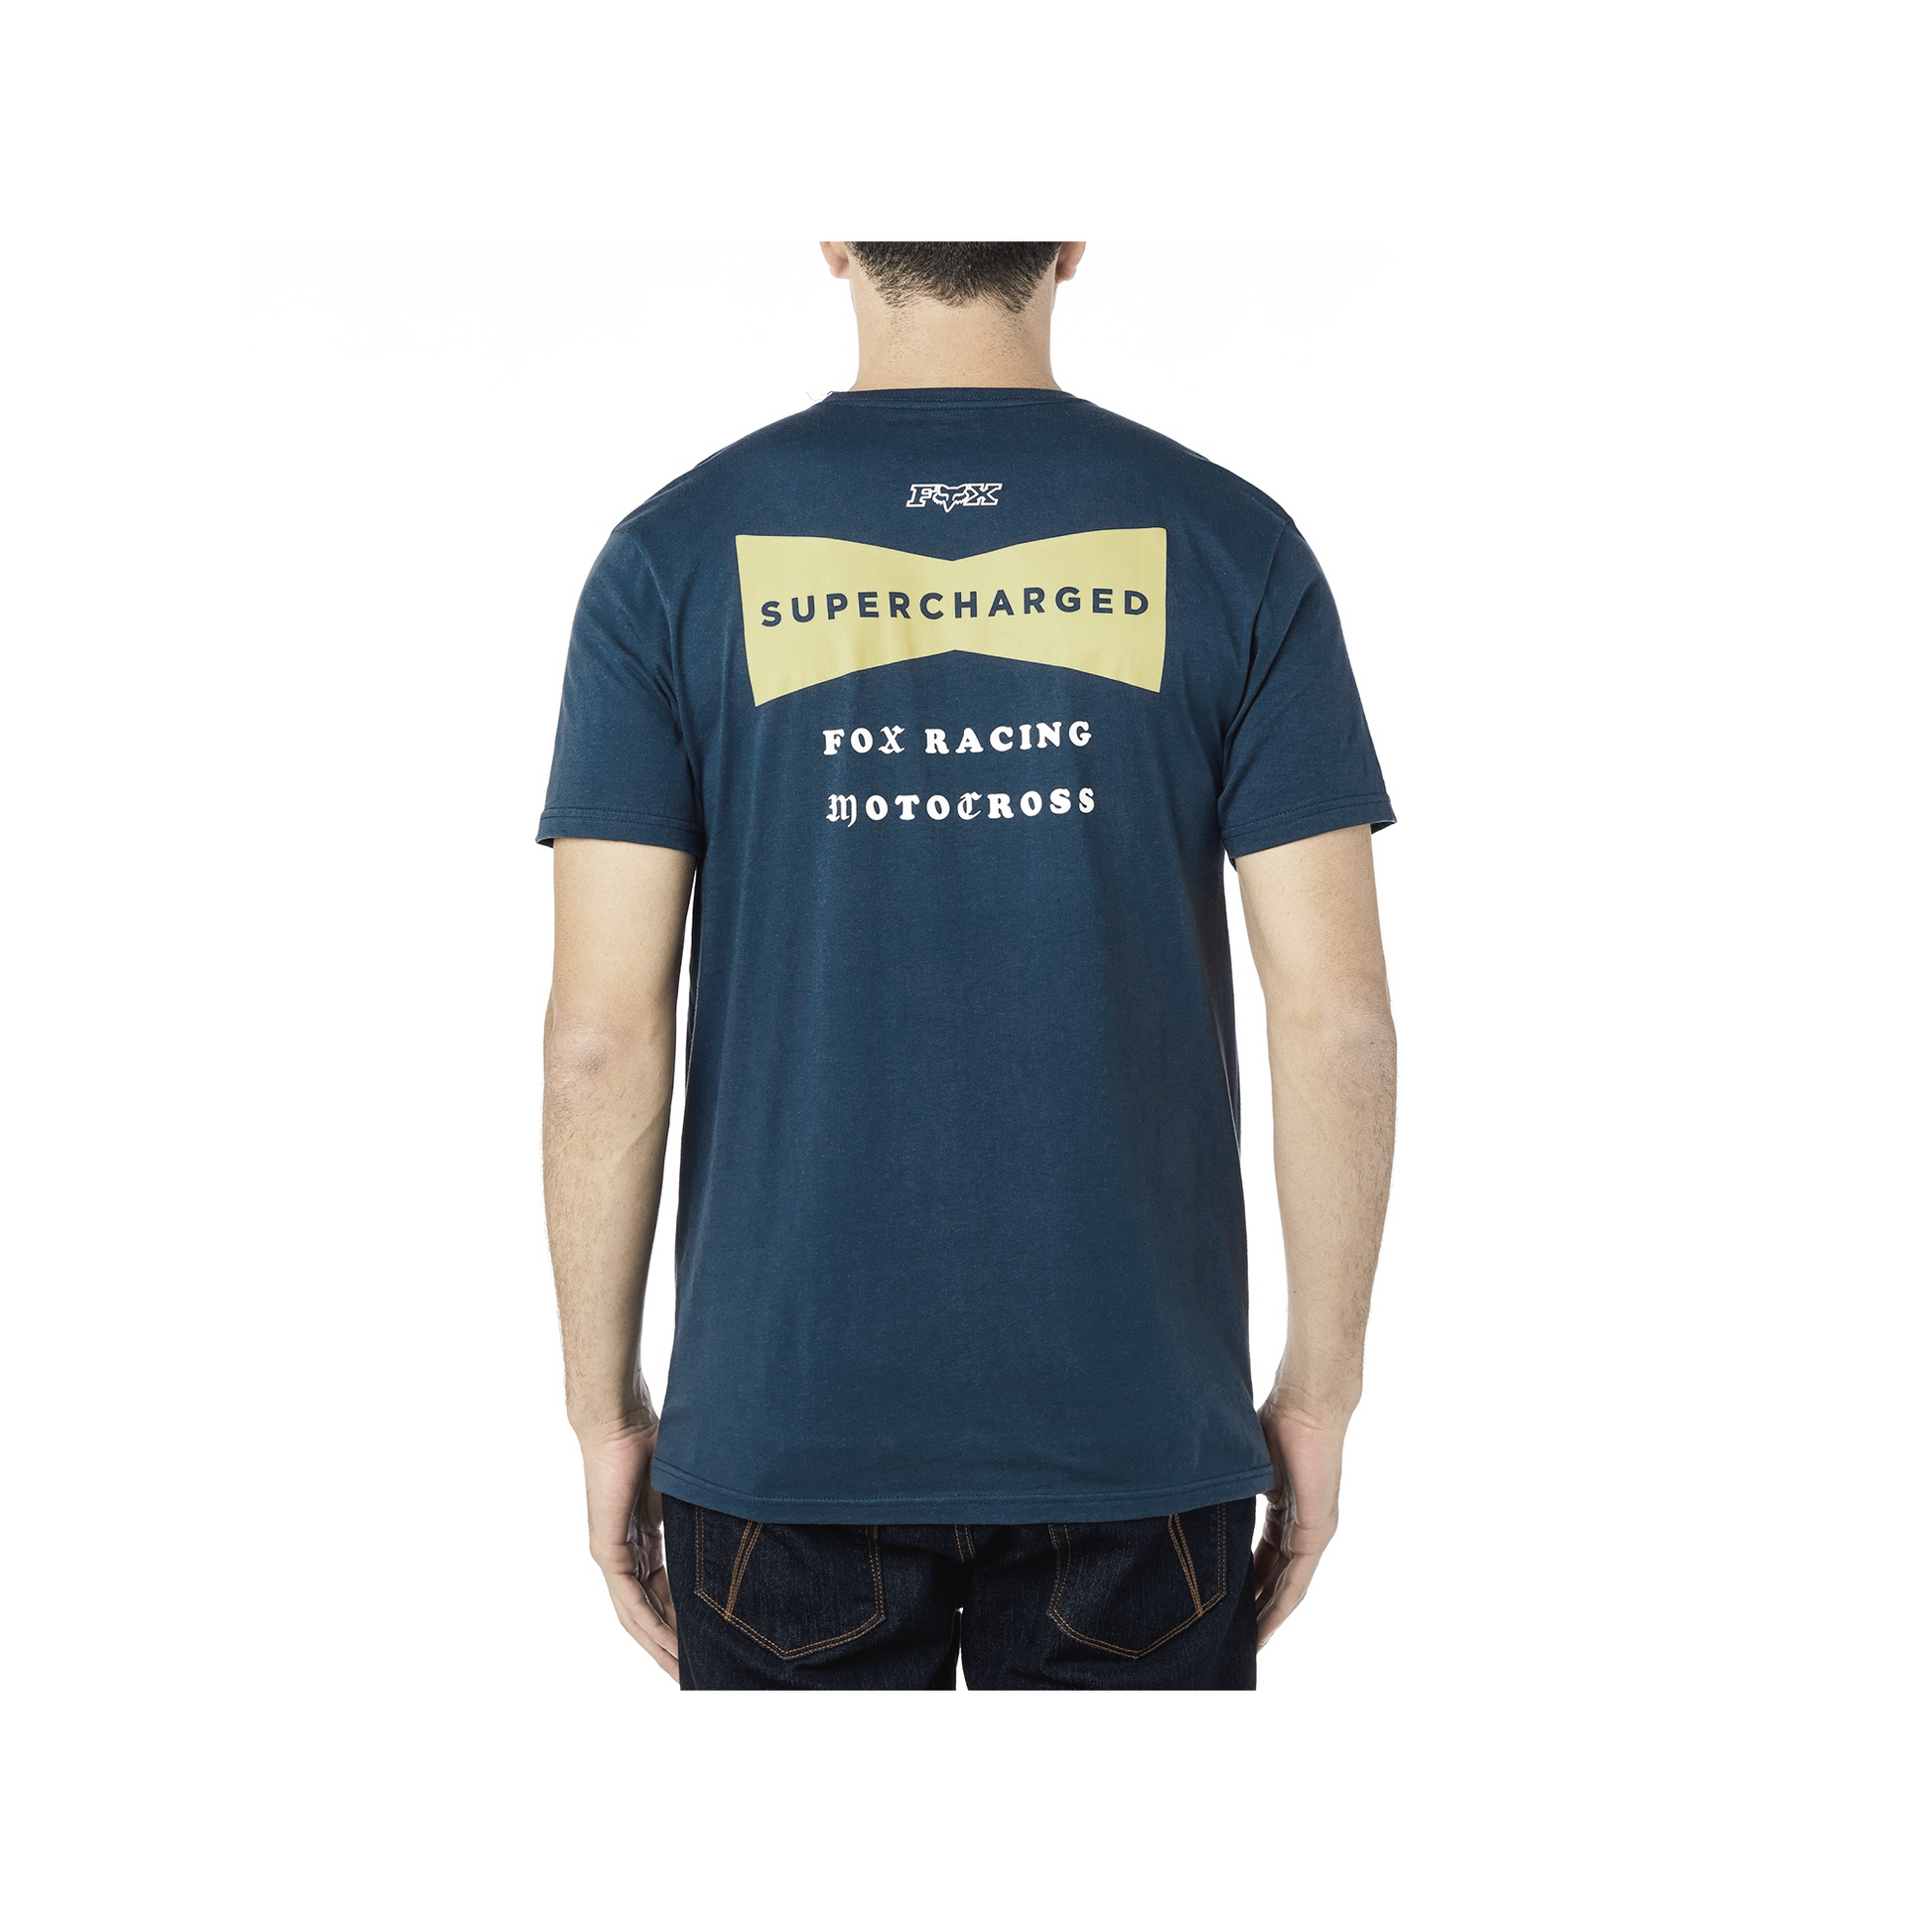 Fox Racing Supercharged Premium Tee Navy Blue Large - ExtremeSupply.com